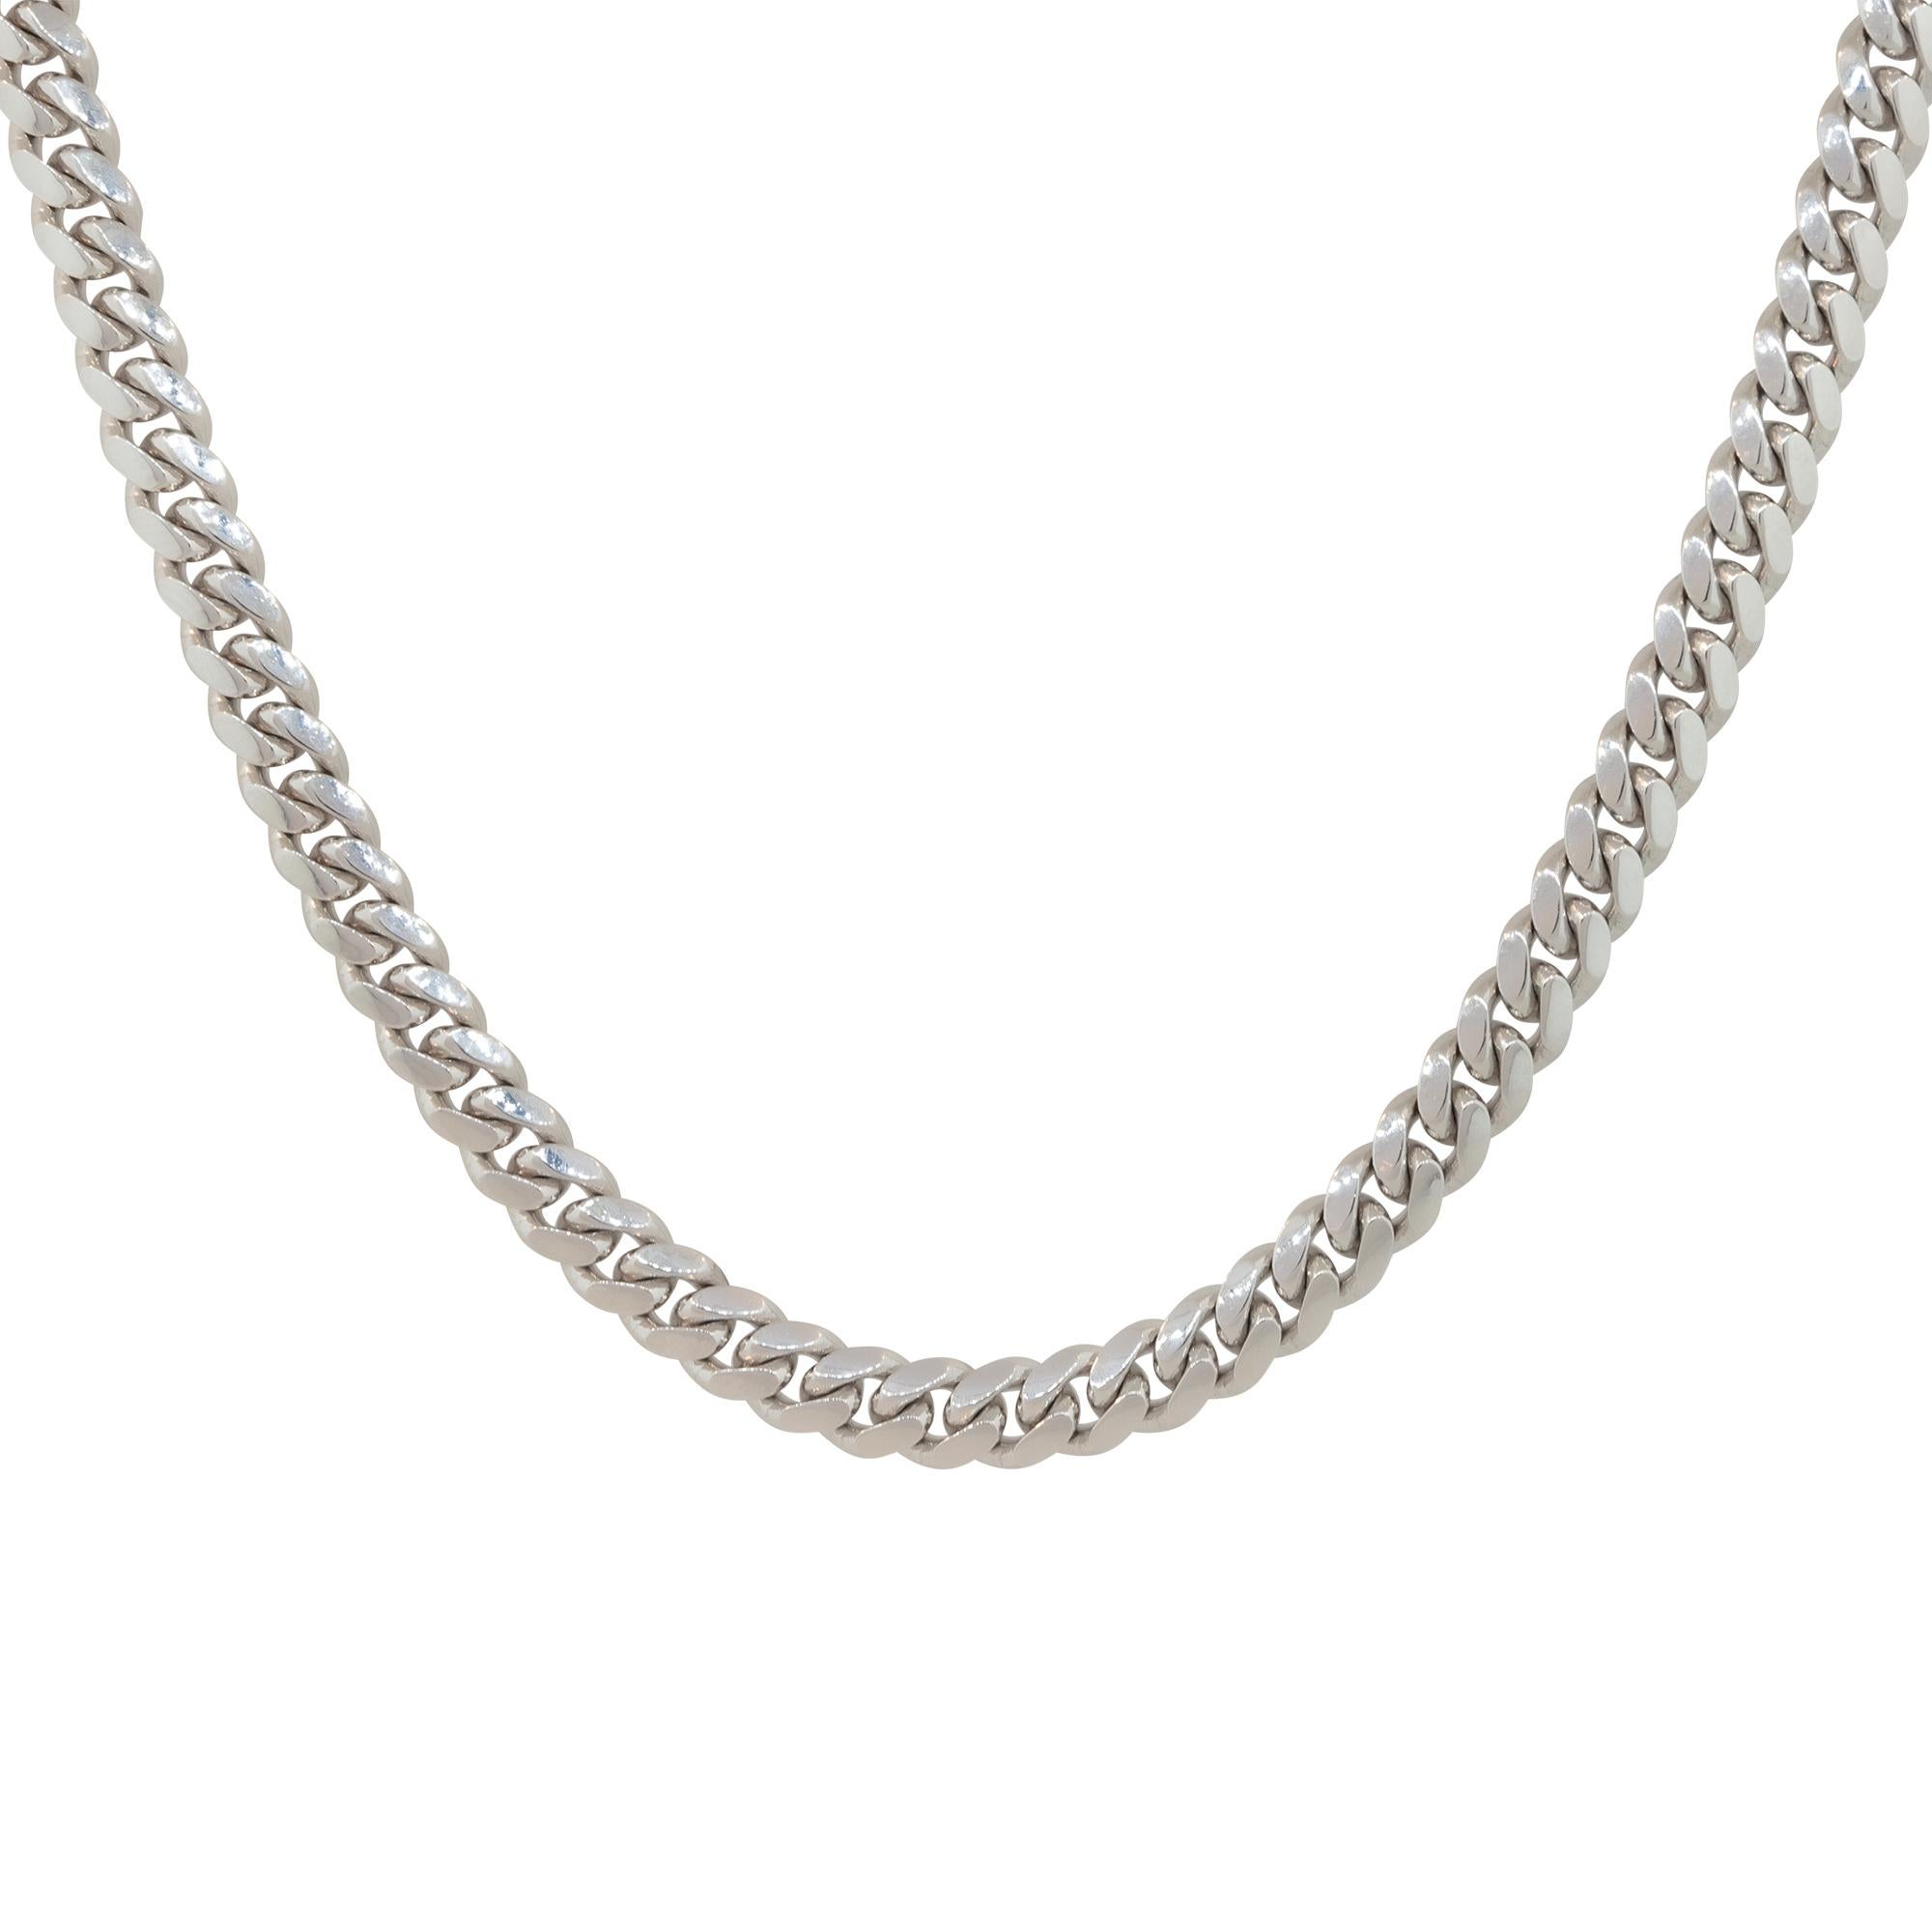 14k White Gold 24″ Men's 5mm Miami Cuban Link Chain

Material: 14k White Gold
Measurements: Necklace Measures 24″ in Length and 5mm in Thickness
Fastening: Spring Ring Clasp
Item Weight: 47.8g (30.7dwt)
Additional Details: This item comes with a